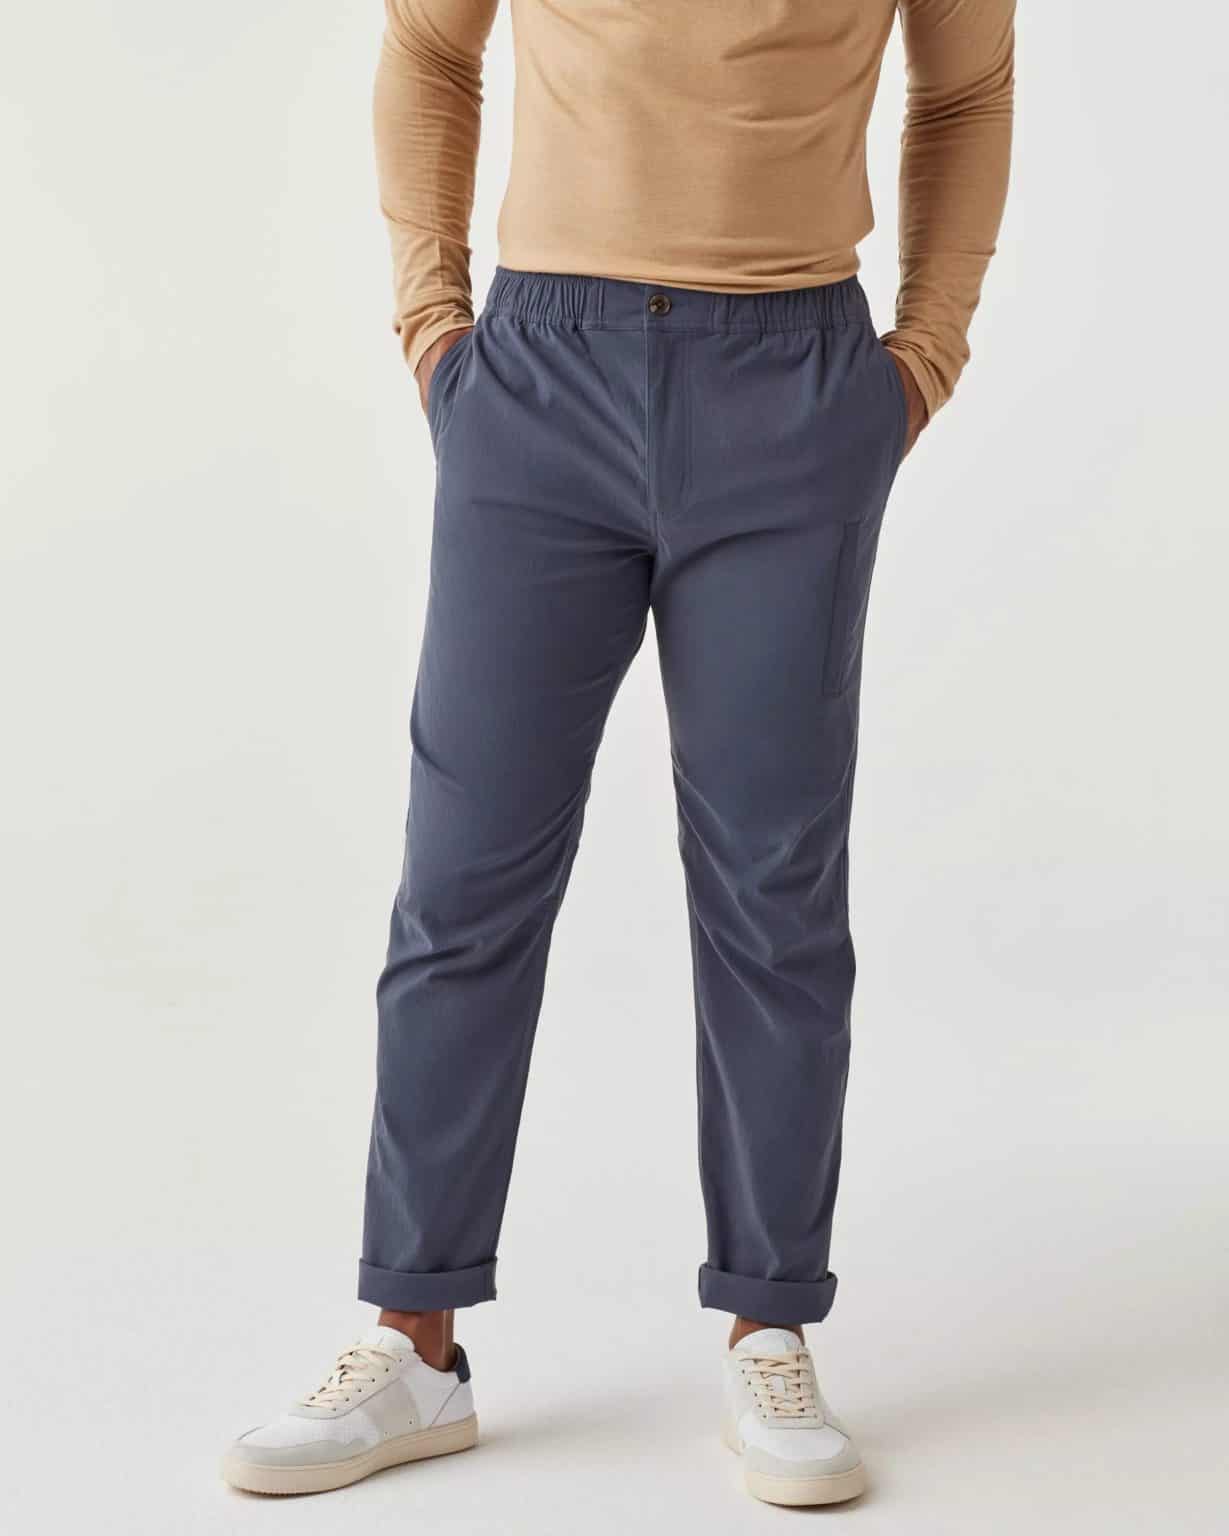 Are my ABC joggers too long/baggy? : r/lululemon